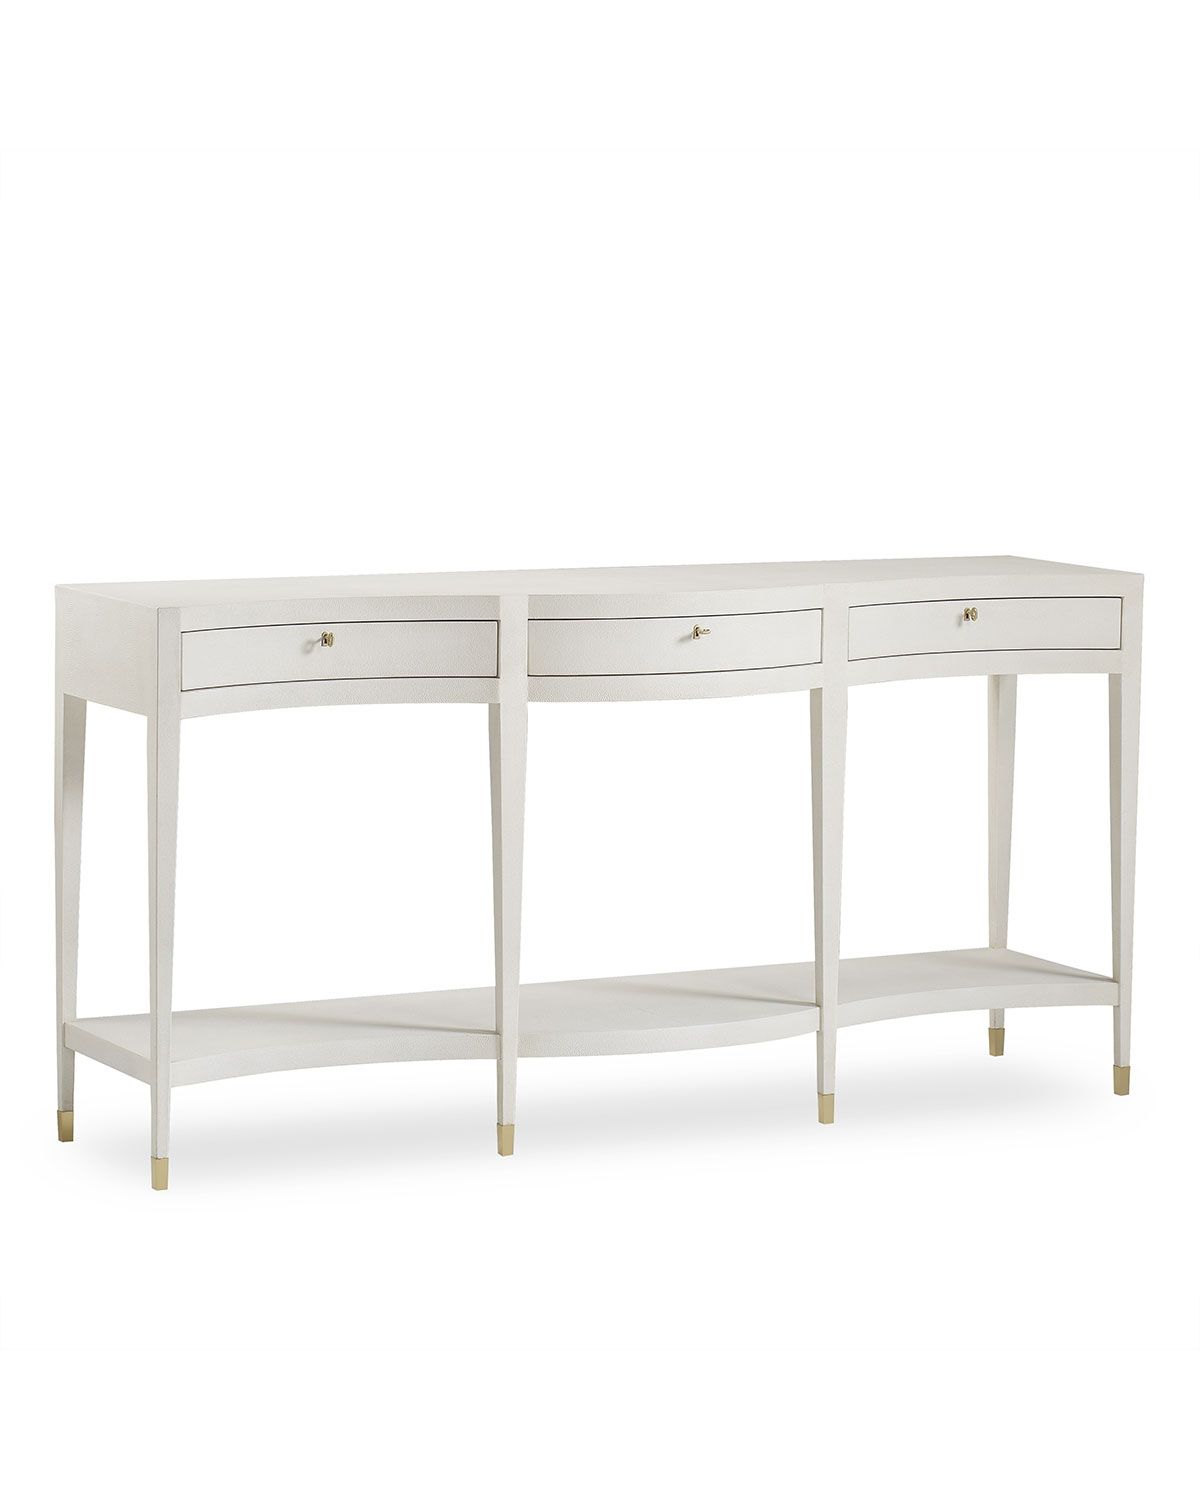 Century Furniture Monroe Faux Shagreen Console Table | Neiman Marcus Intended For Faux Shagreen Console Tables (View 7 of 20)